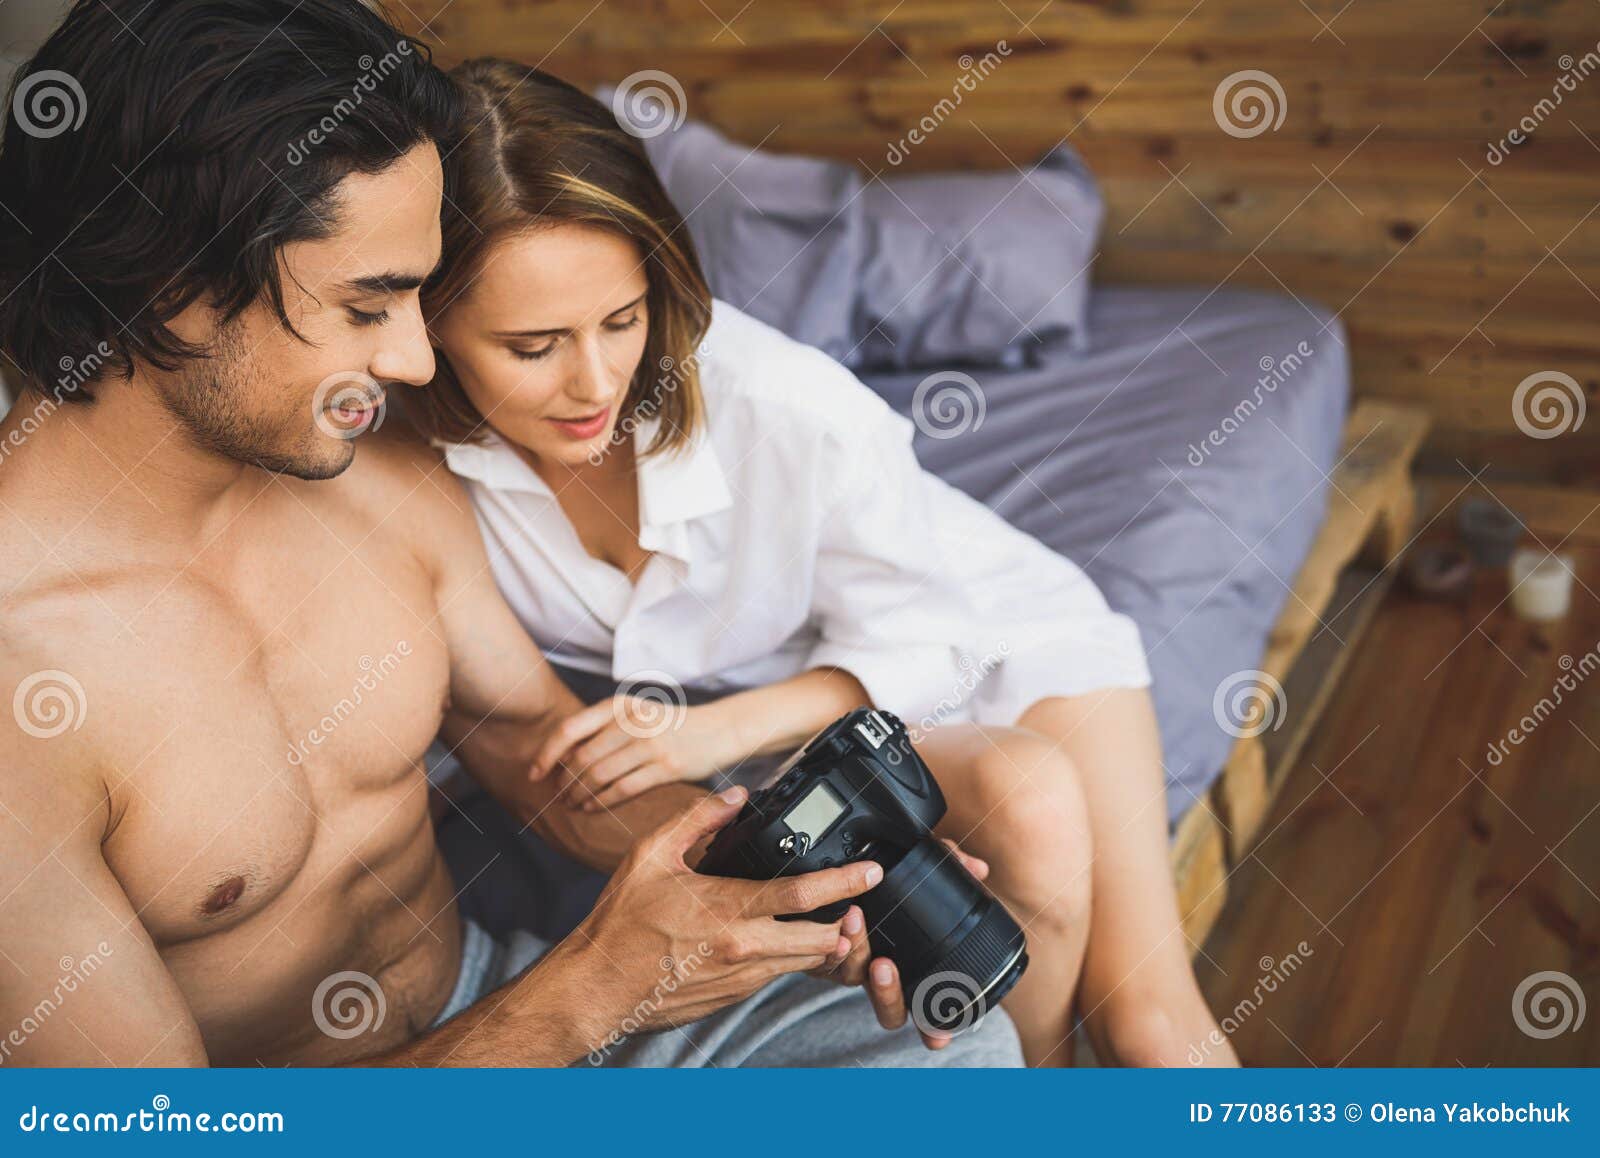 Couple on a Bed Watching Pictures Stock Image photo